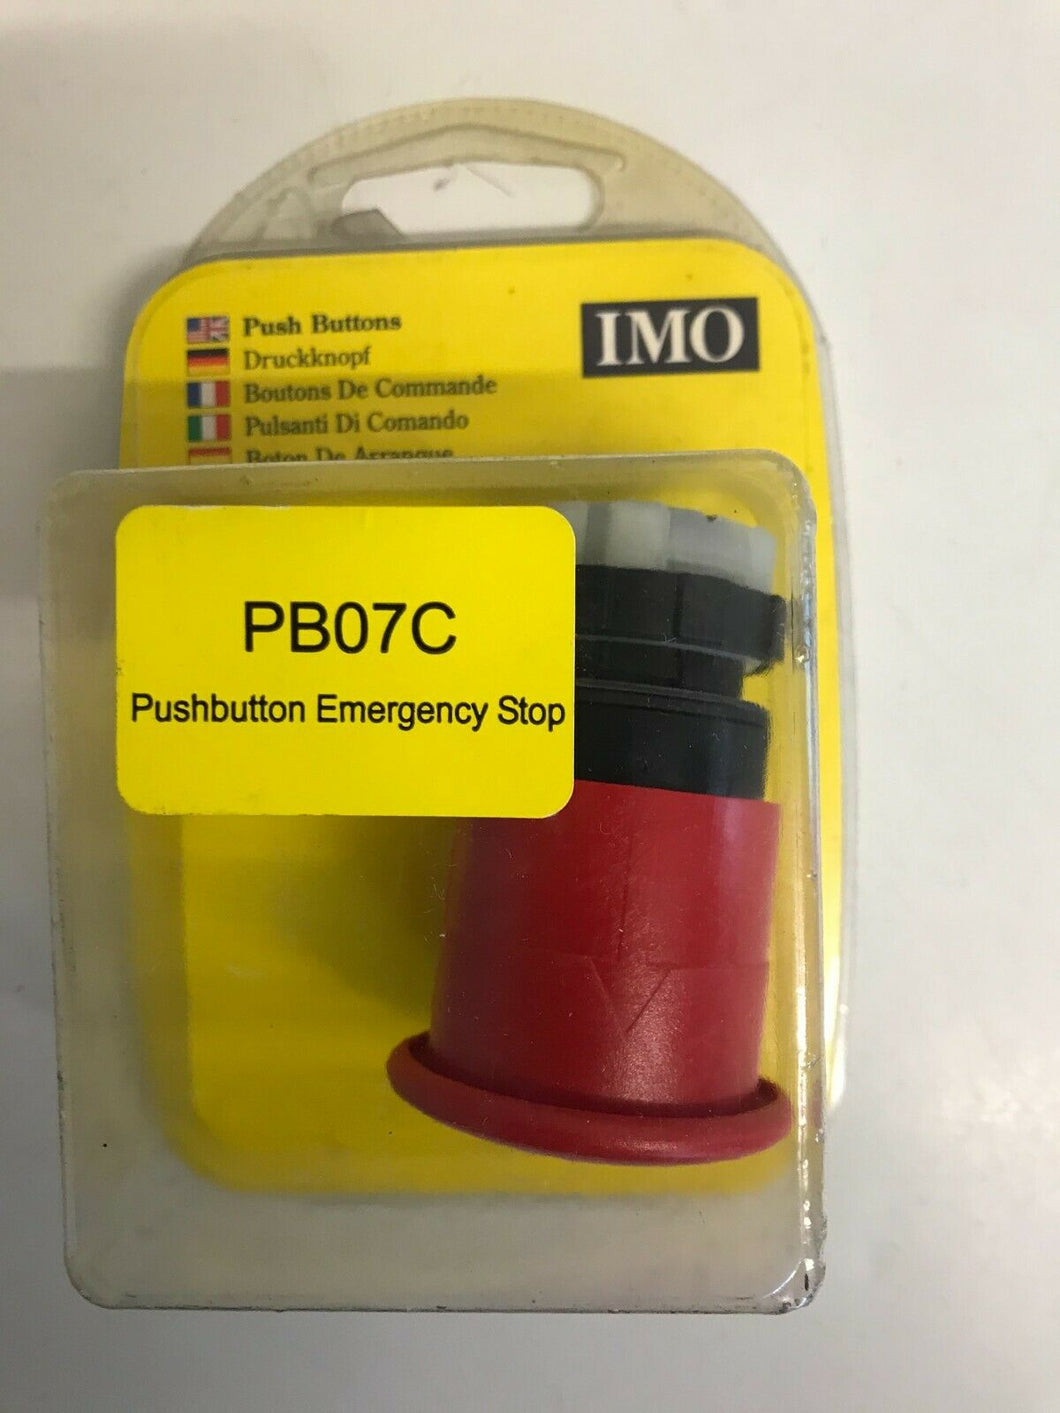 NEW IMO Pushbutton Emergency Stop - PB07C